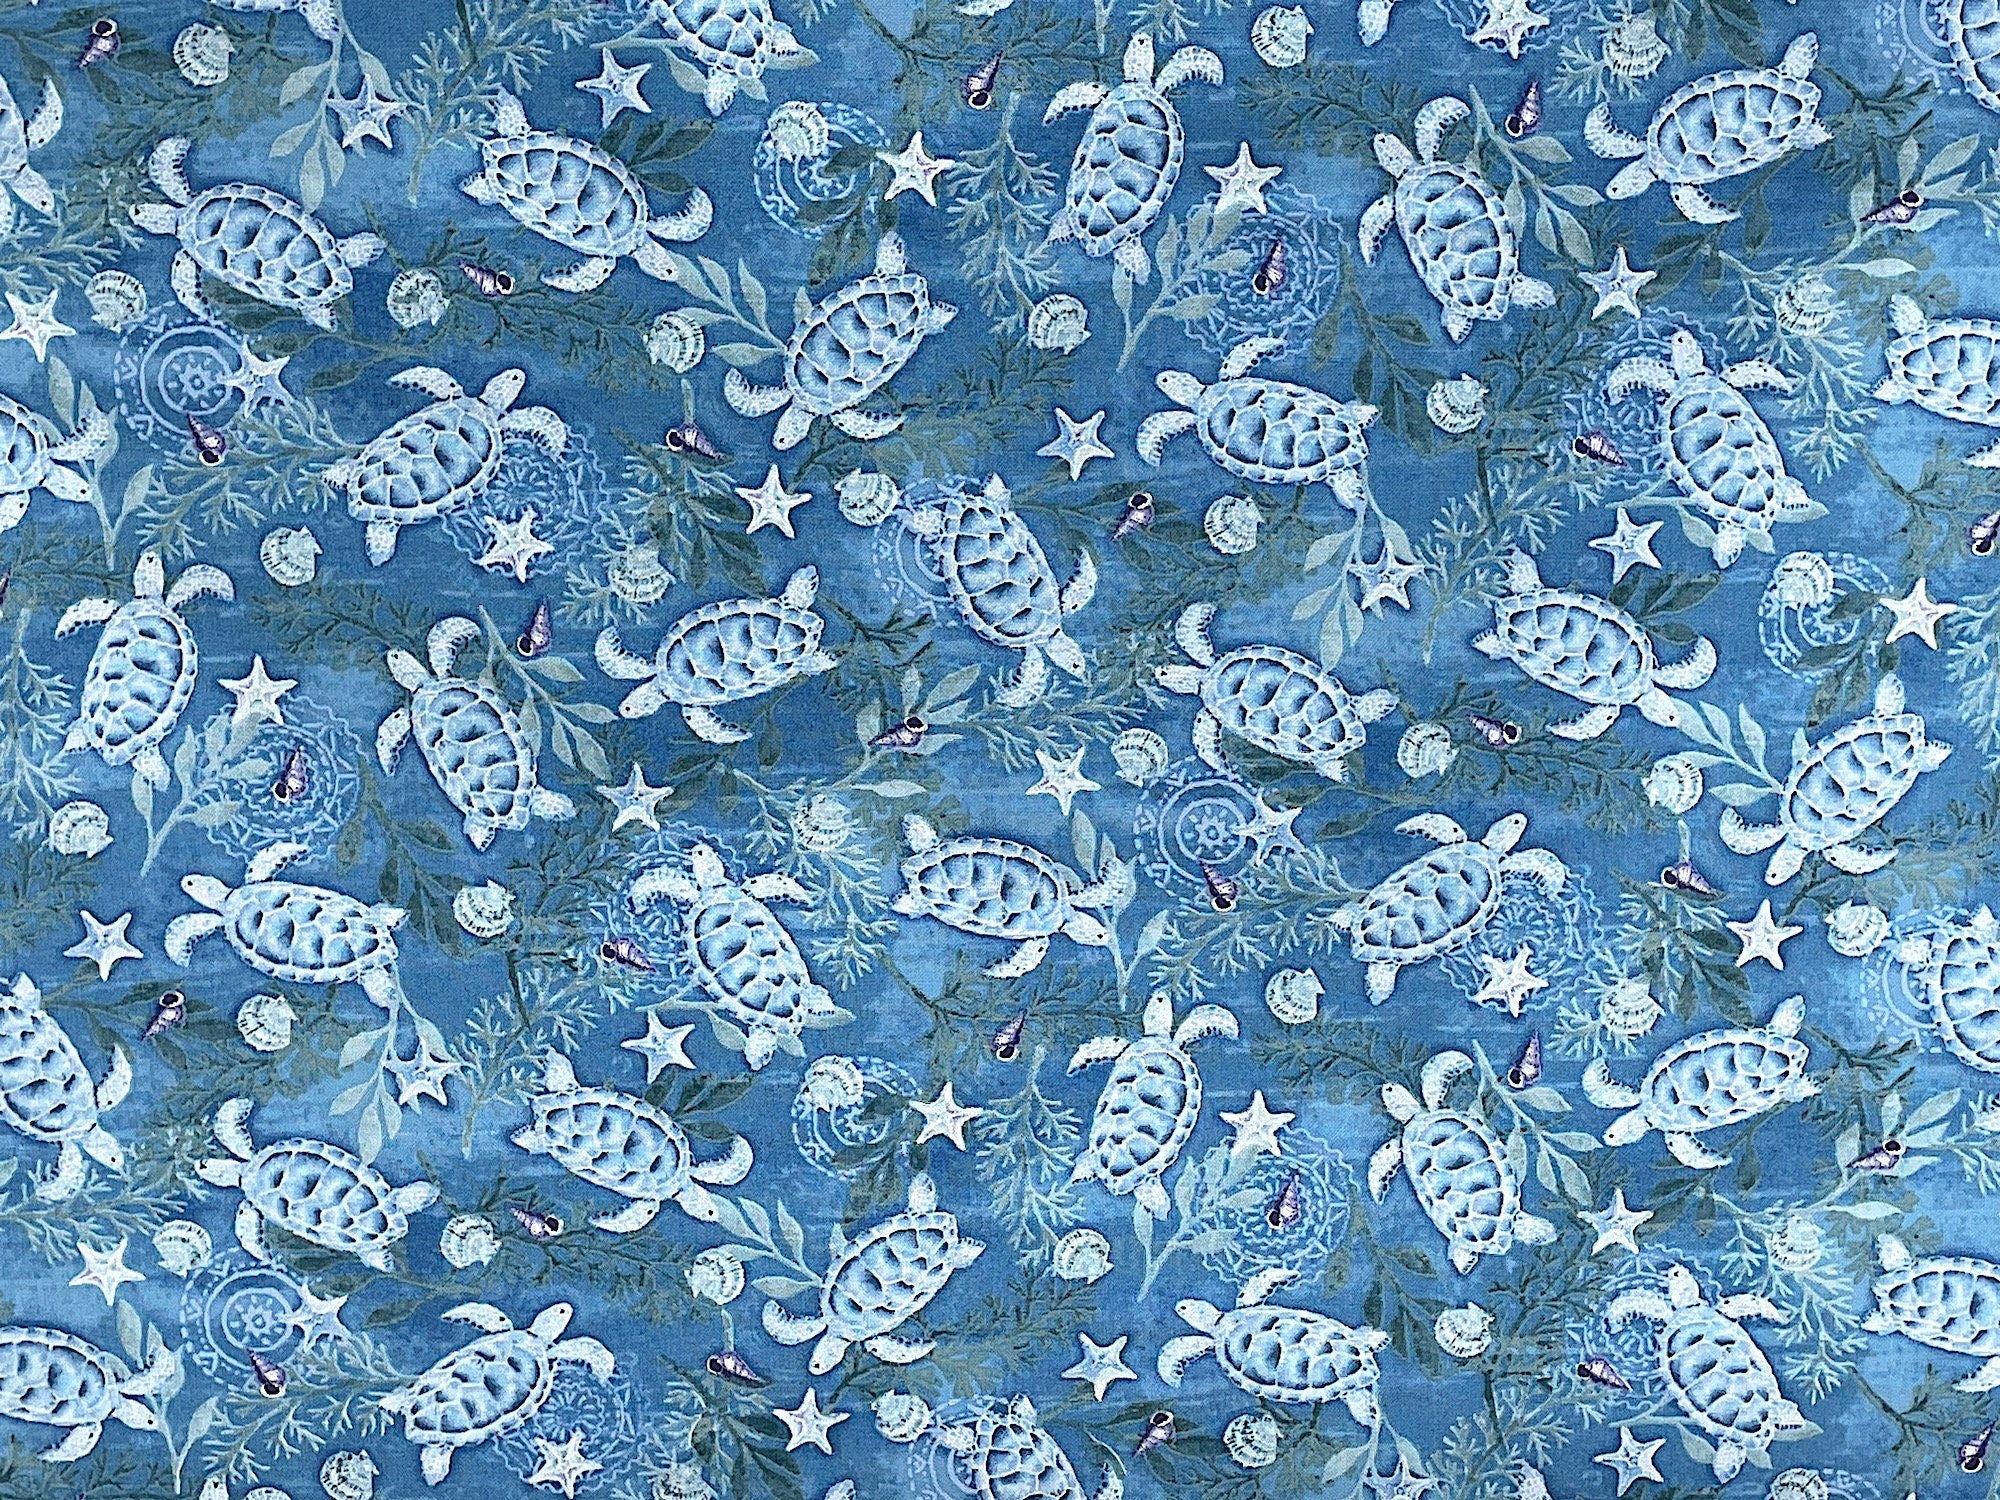 This blue fabric is part of the Salt and Sea collection by Andrea Tachiera. This cotton fabric is covered with turtles, starfish and sea shells and water plants. See my other listings for more fabrics from this collection as seen in the last picture and video.